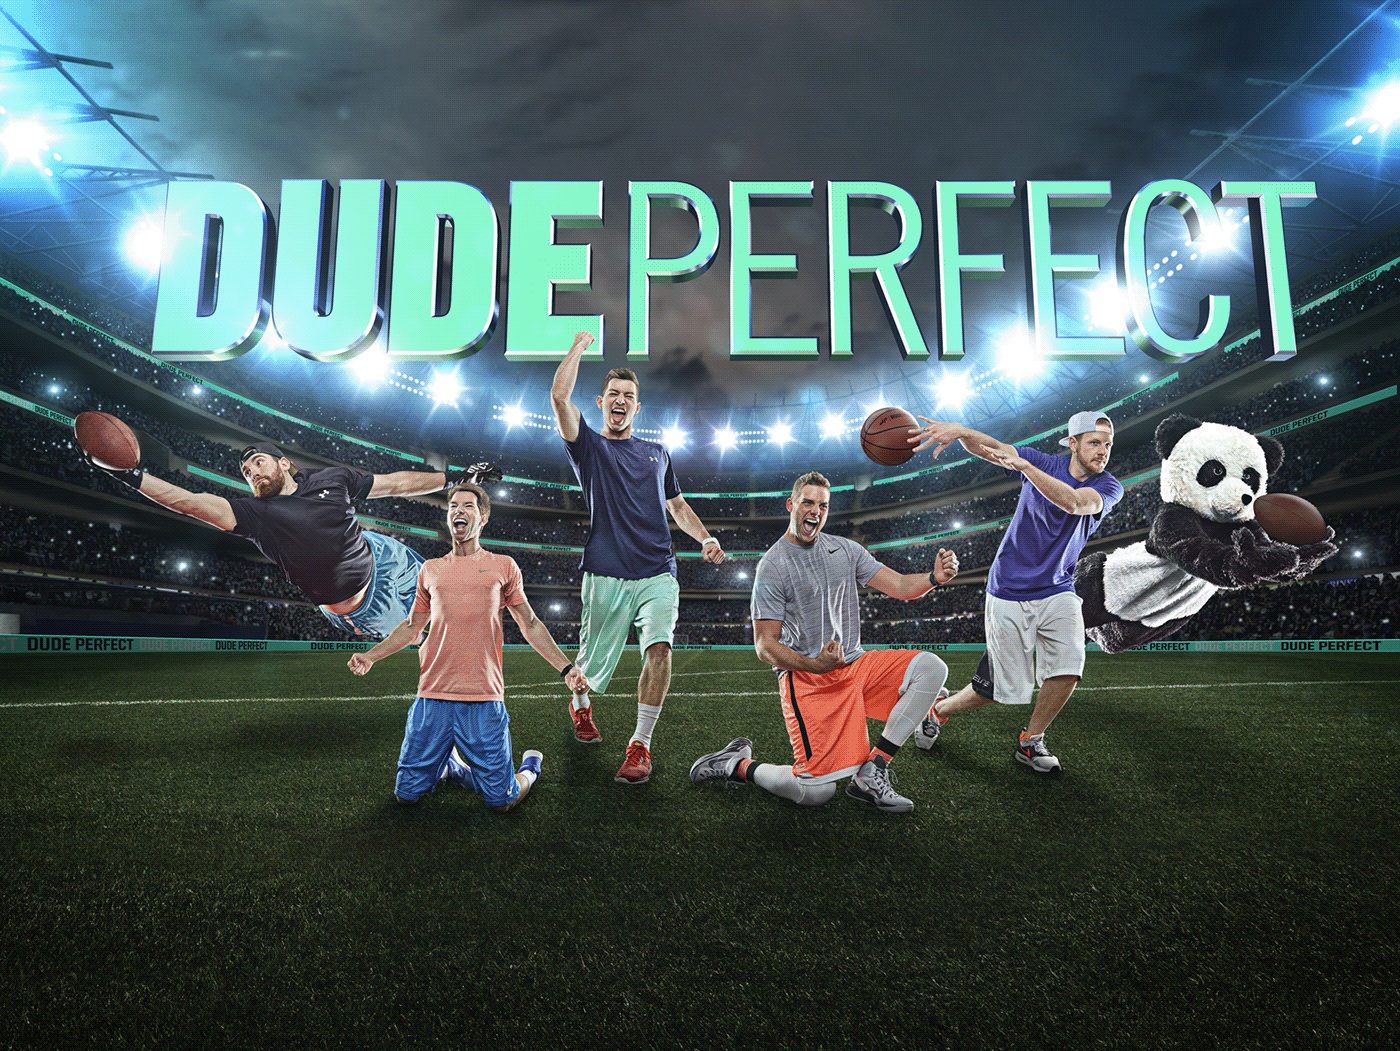 Dude Perfect - Mix of photography assets, 3D type, 3D elements, and photosh...